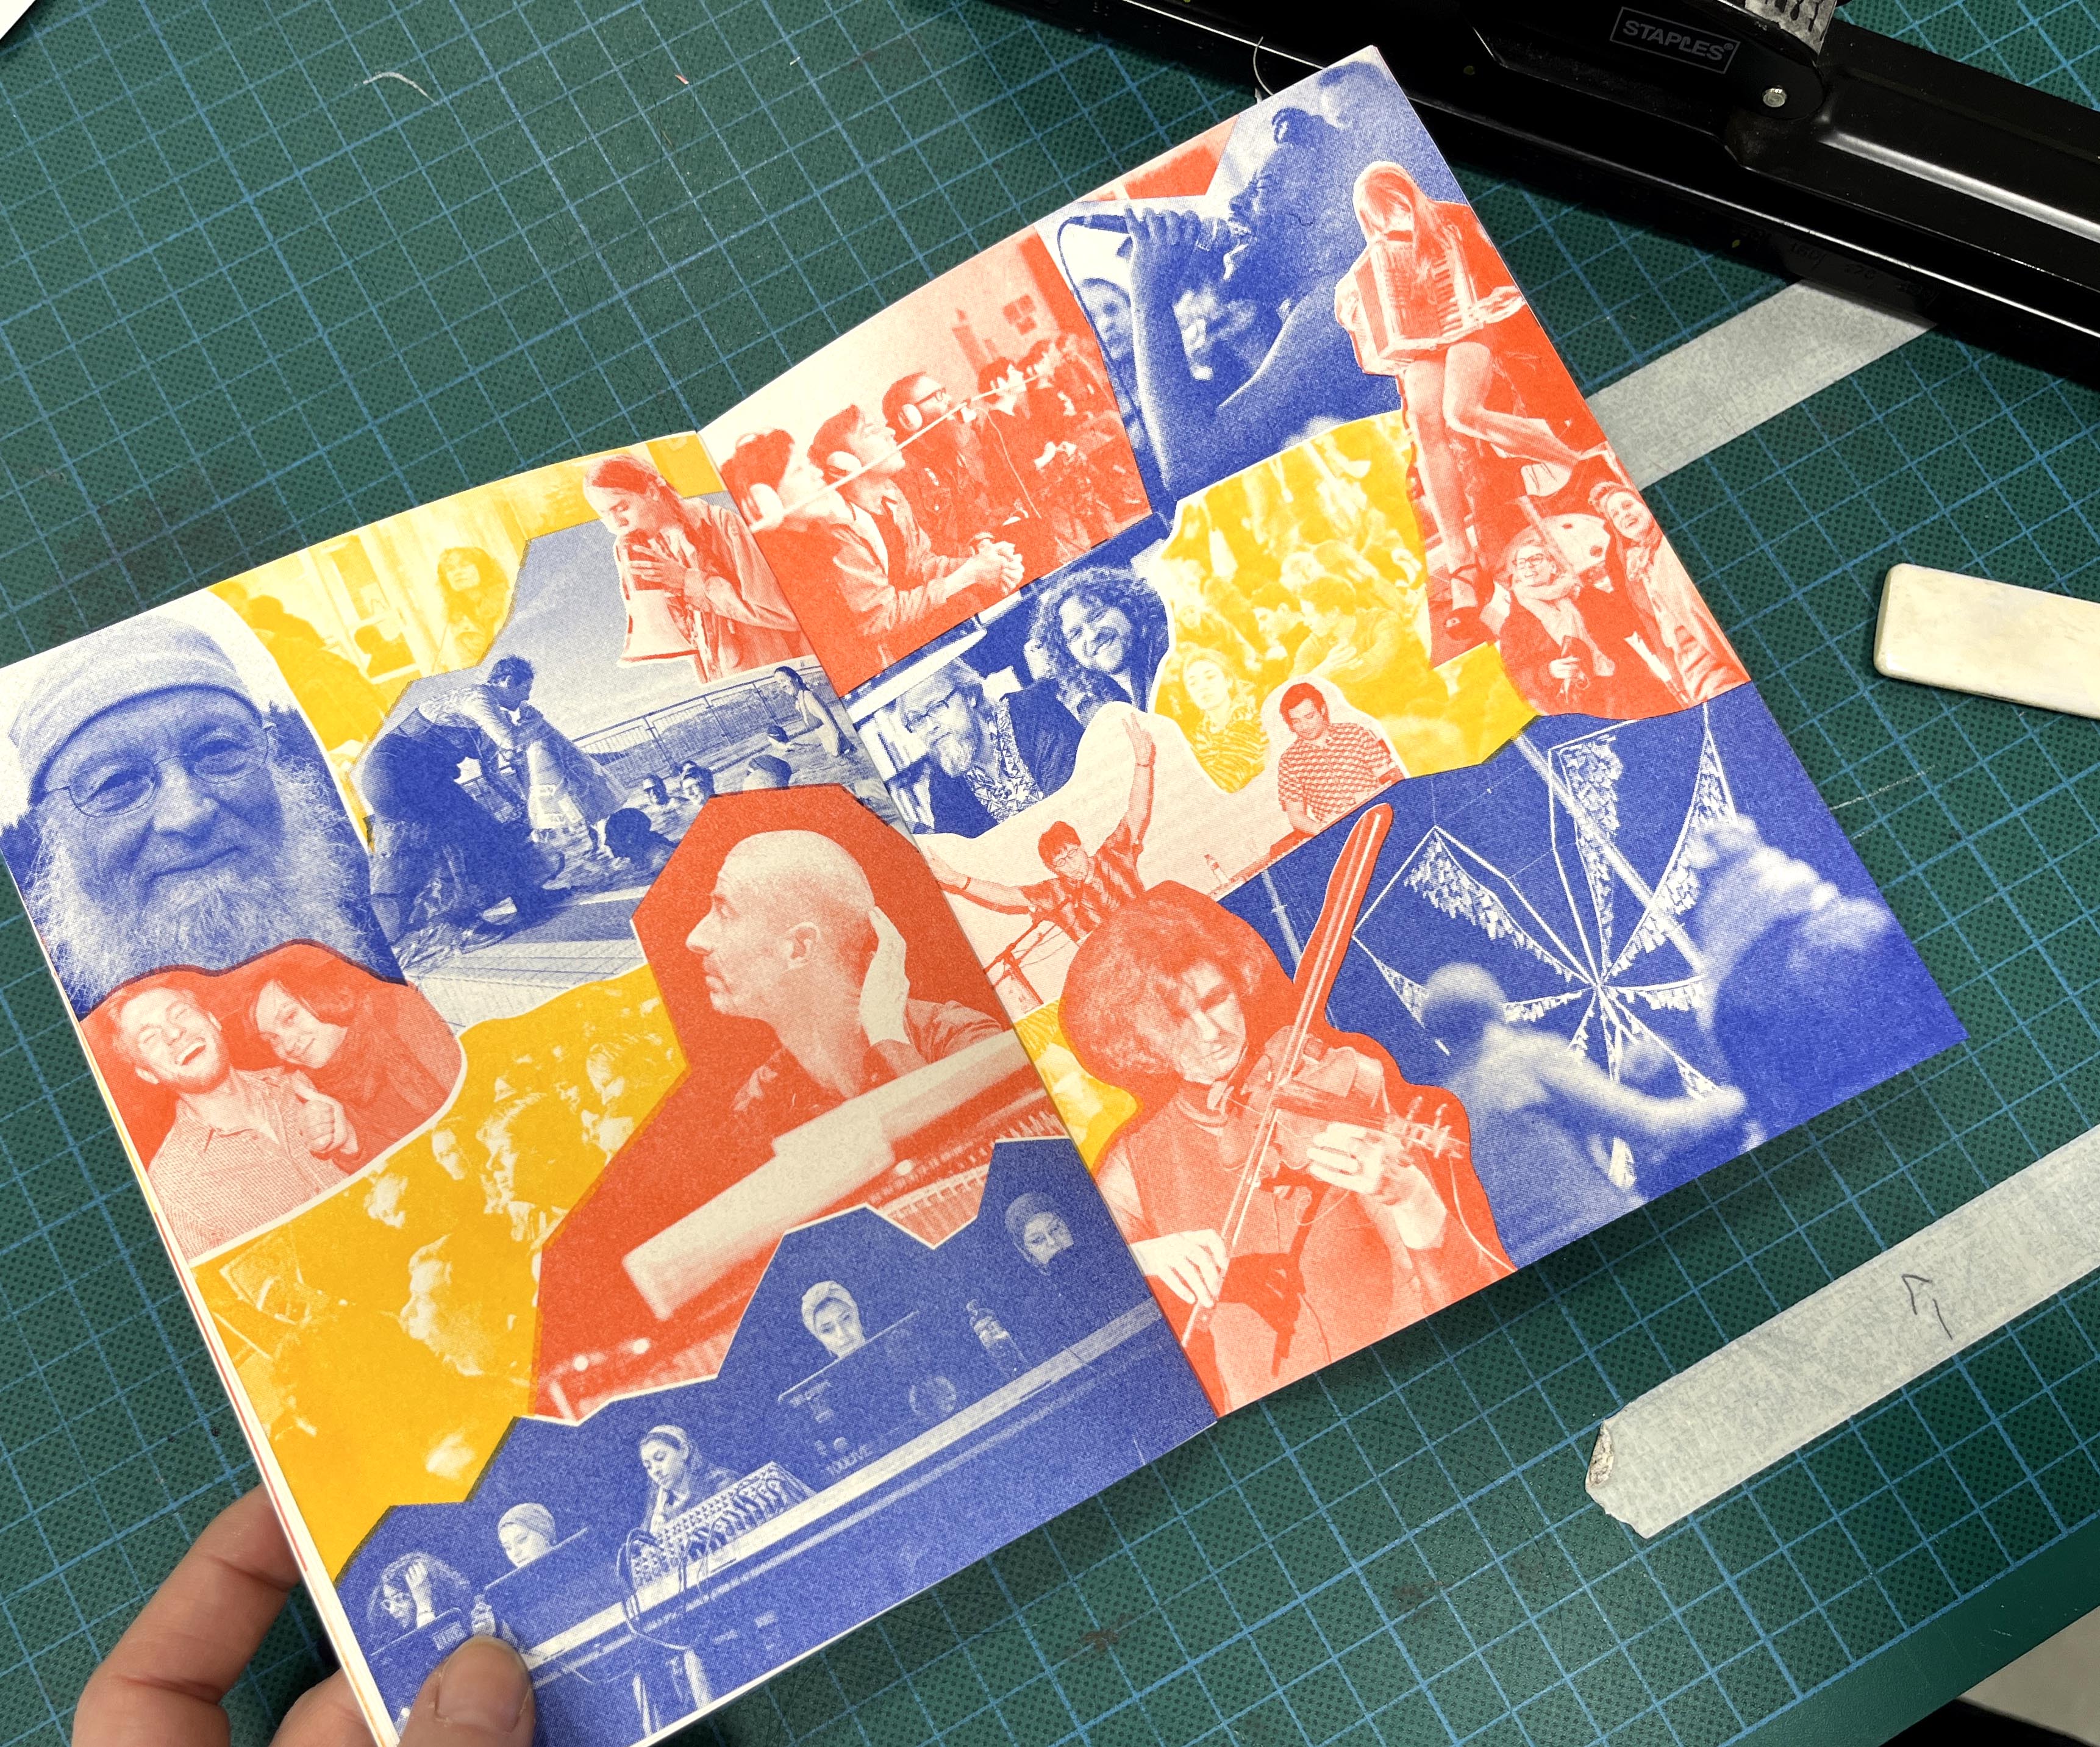 A brochure with its middle spread open. The spread contains a collage of images of people playing instruments, and people smiling. There is a mix of photographs in red, yellow and blue.